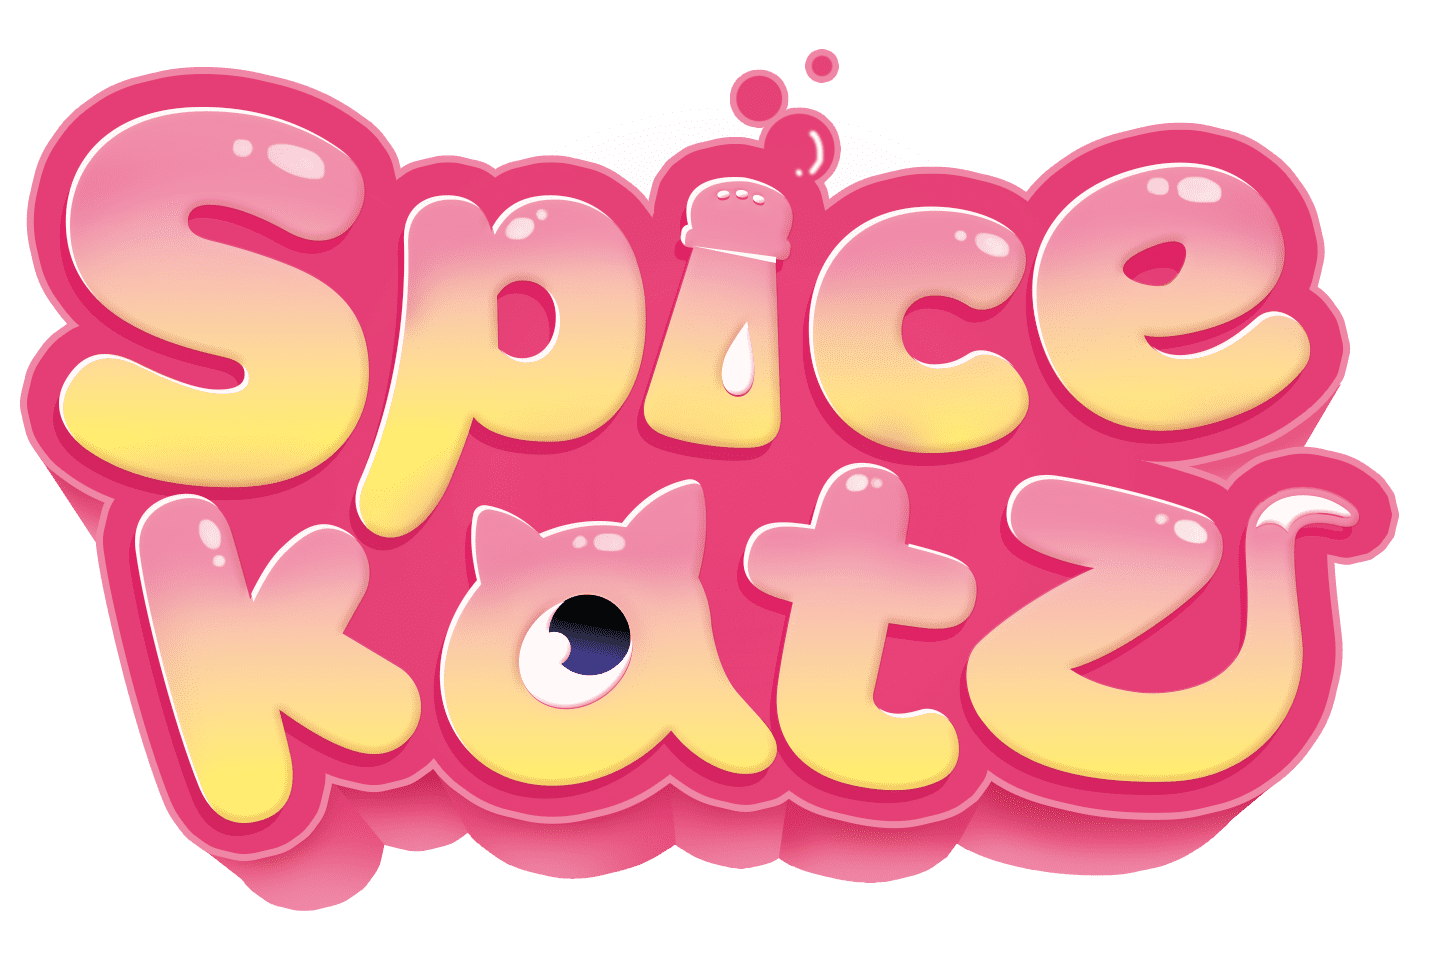 We are Spice Katz | Family Board Game